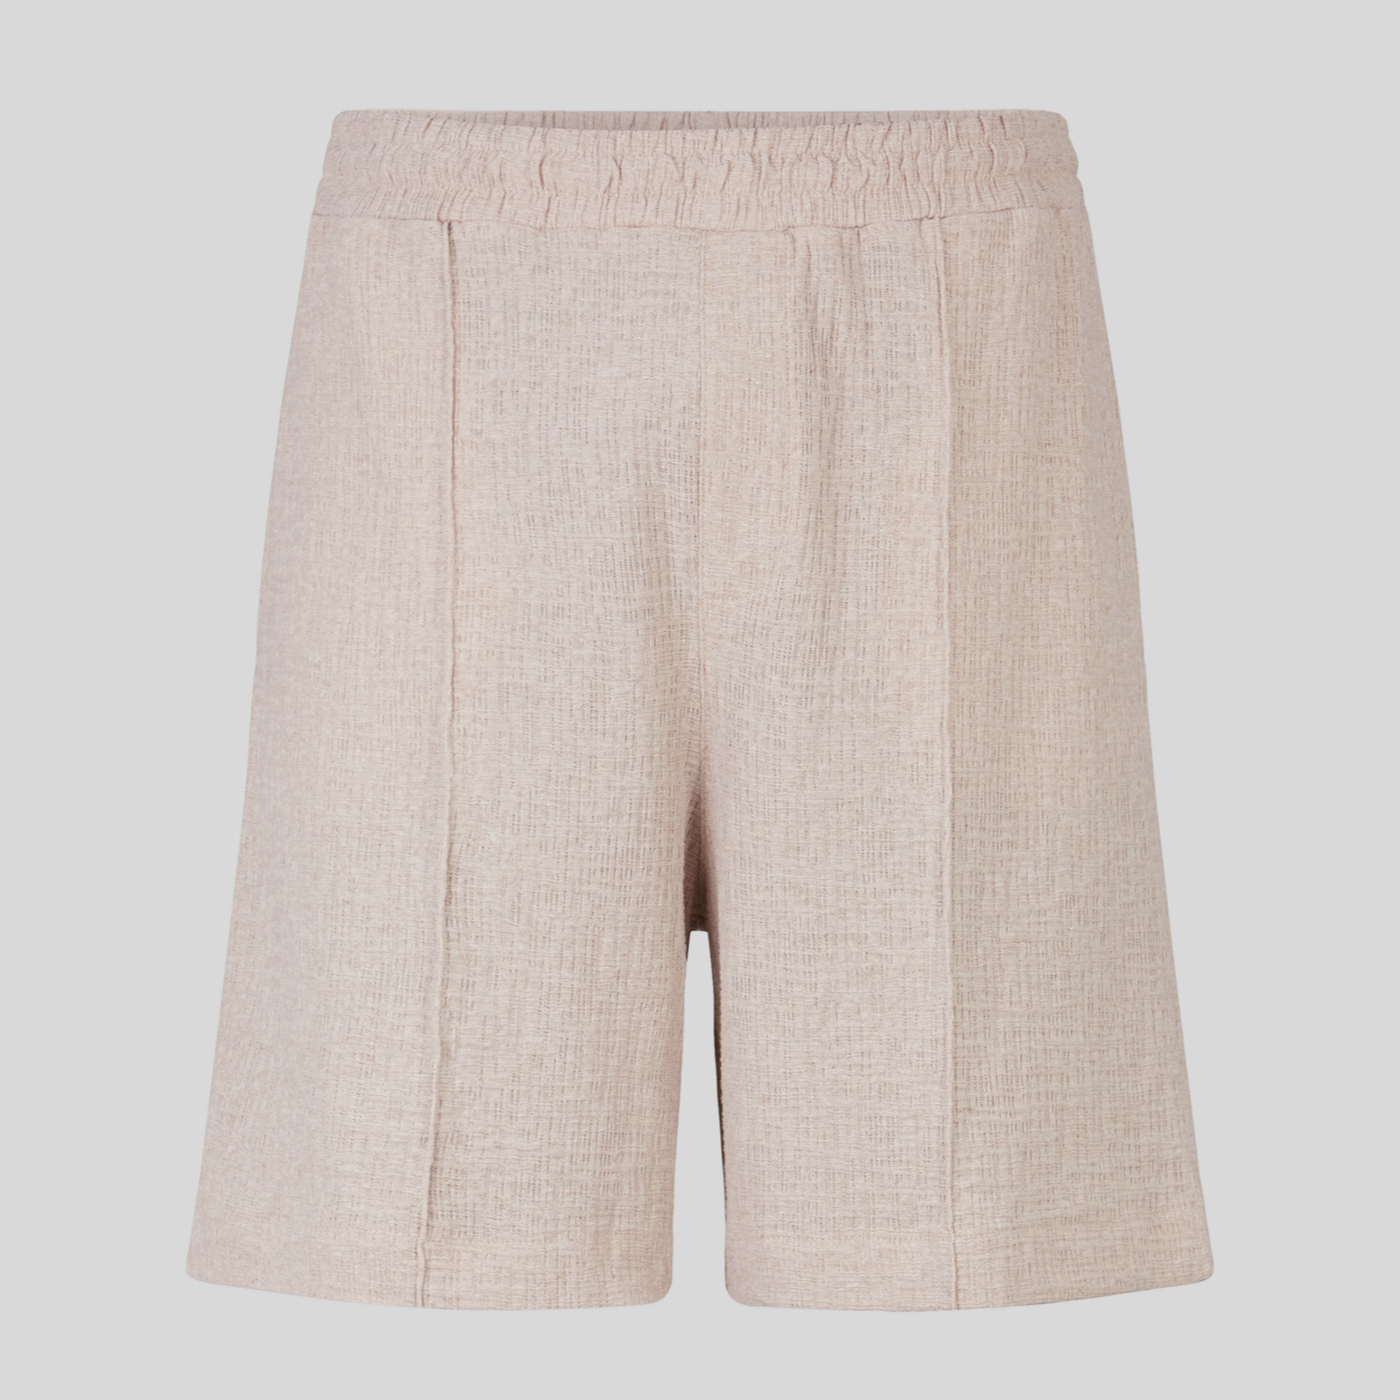 Gotstyle Fashion - Joop! Shorts Structured Shorts with Pintuck Details - Beige